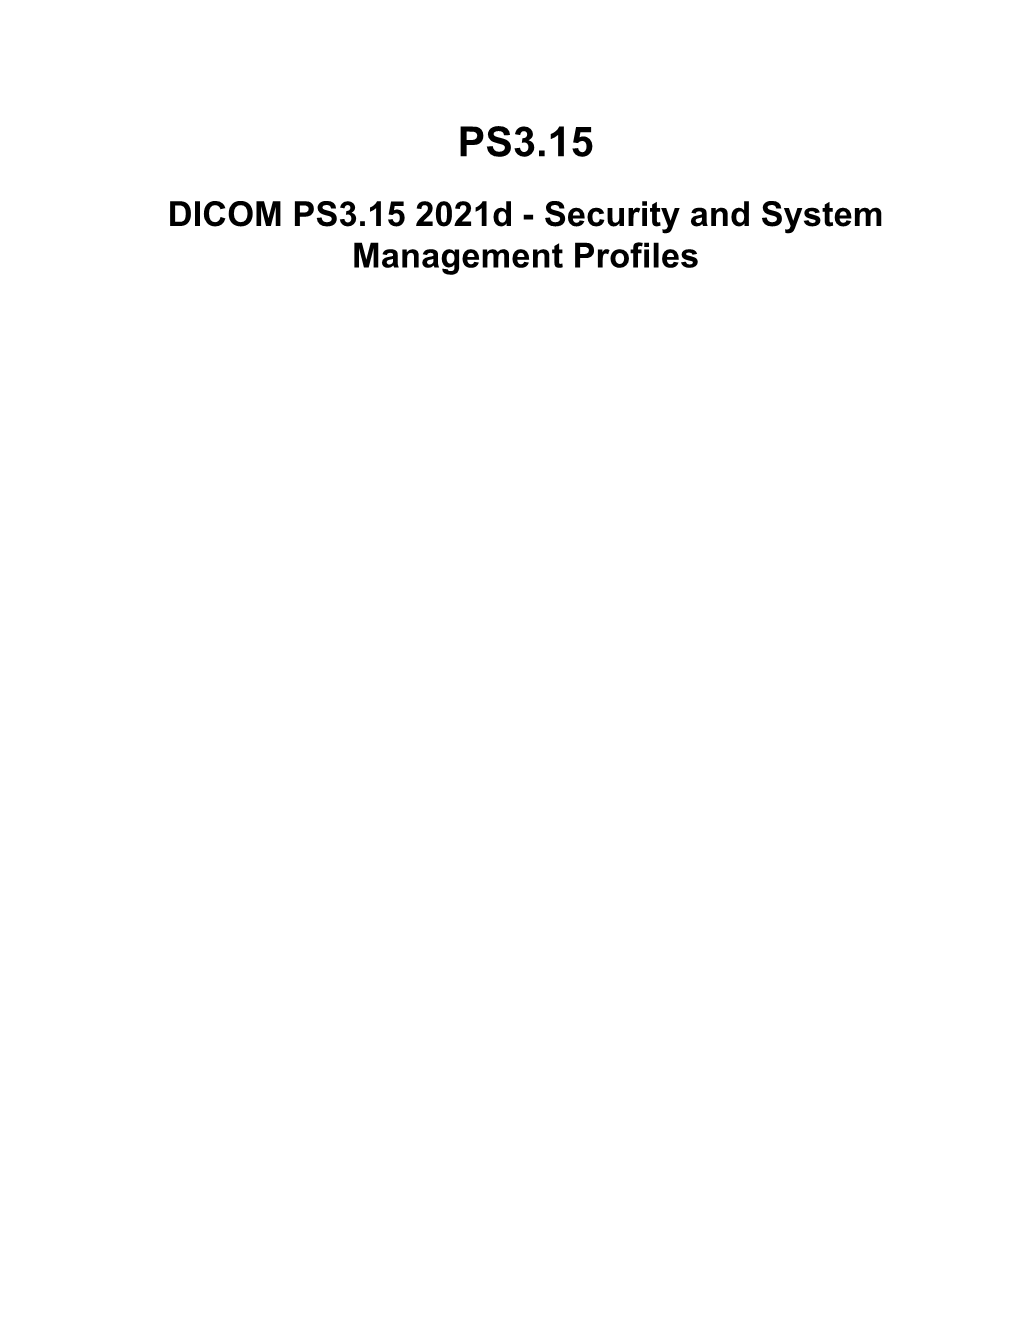 PS3.15​ DICOM PS3.15 2021D - Security and System​ Management Profiles​ Page 2​